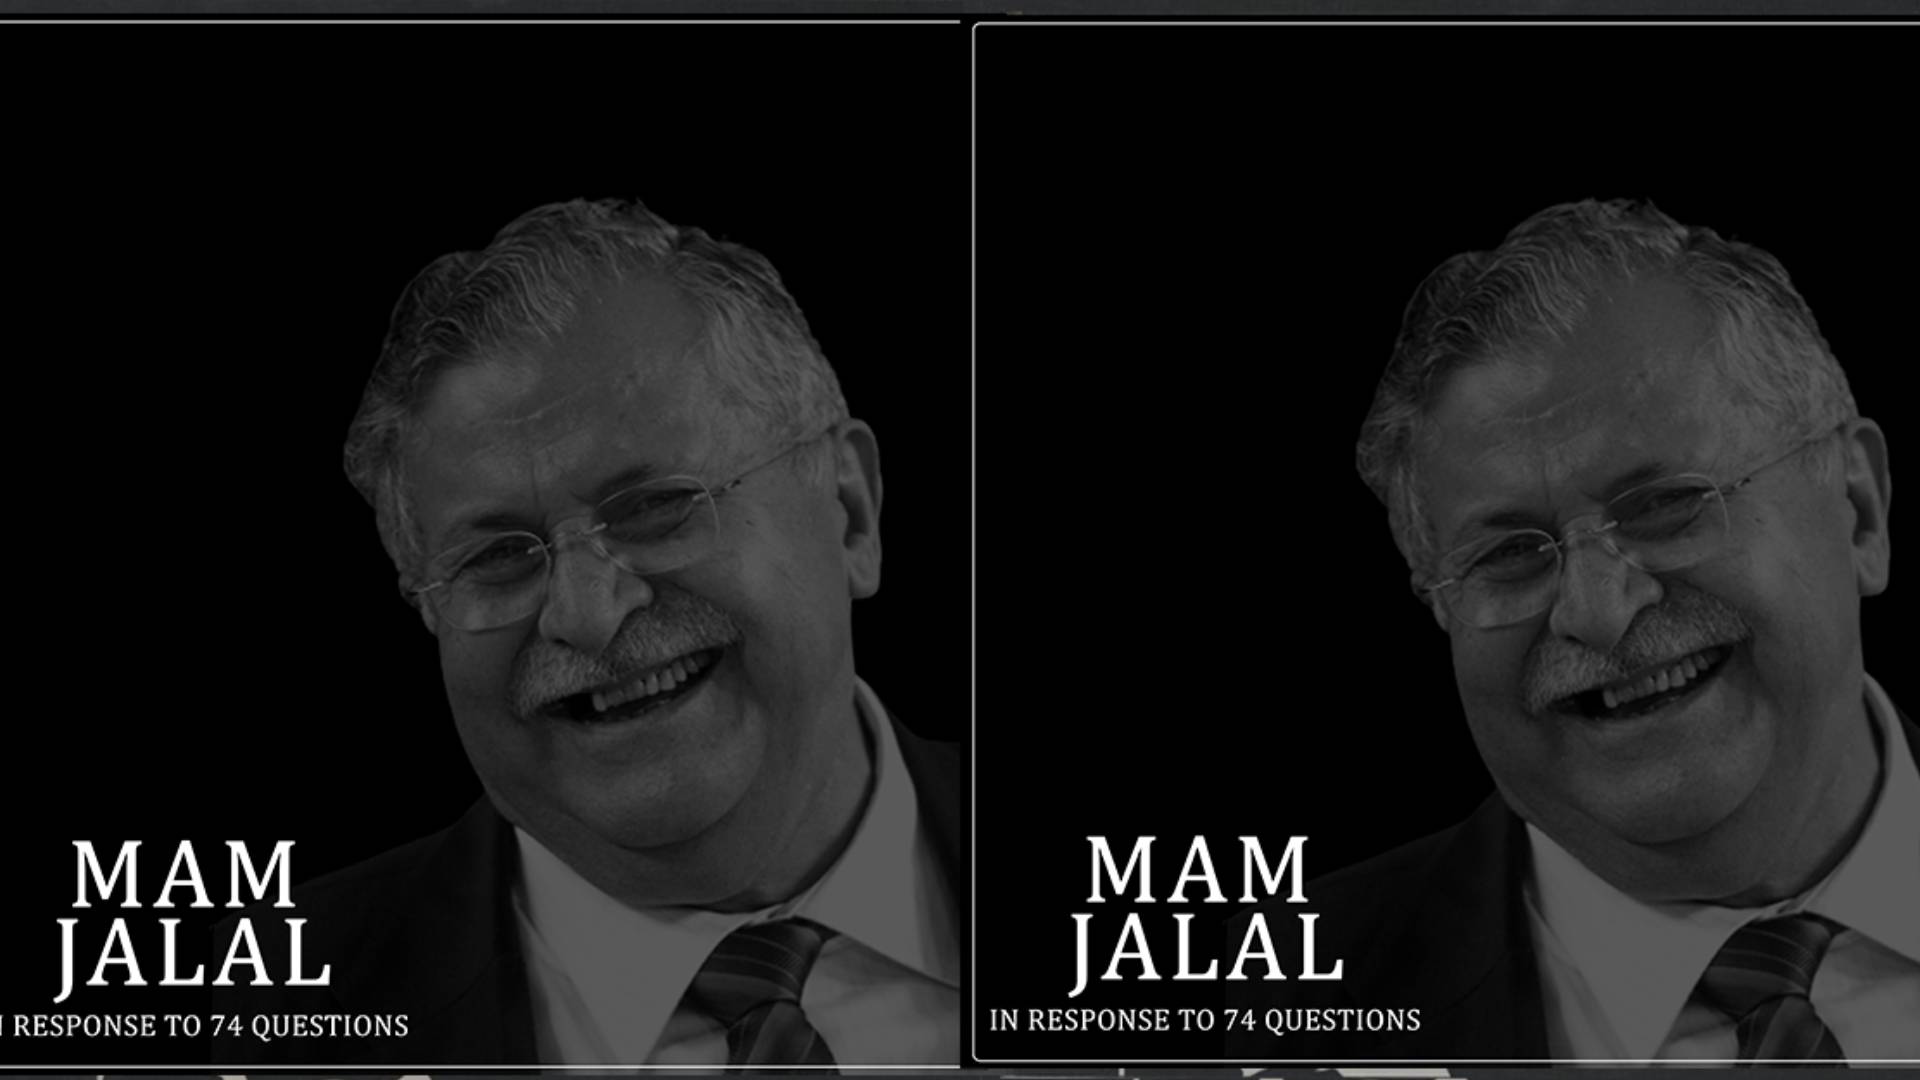 The cover of the book "Mam Jalal in Response to 74 Questions"